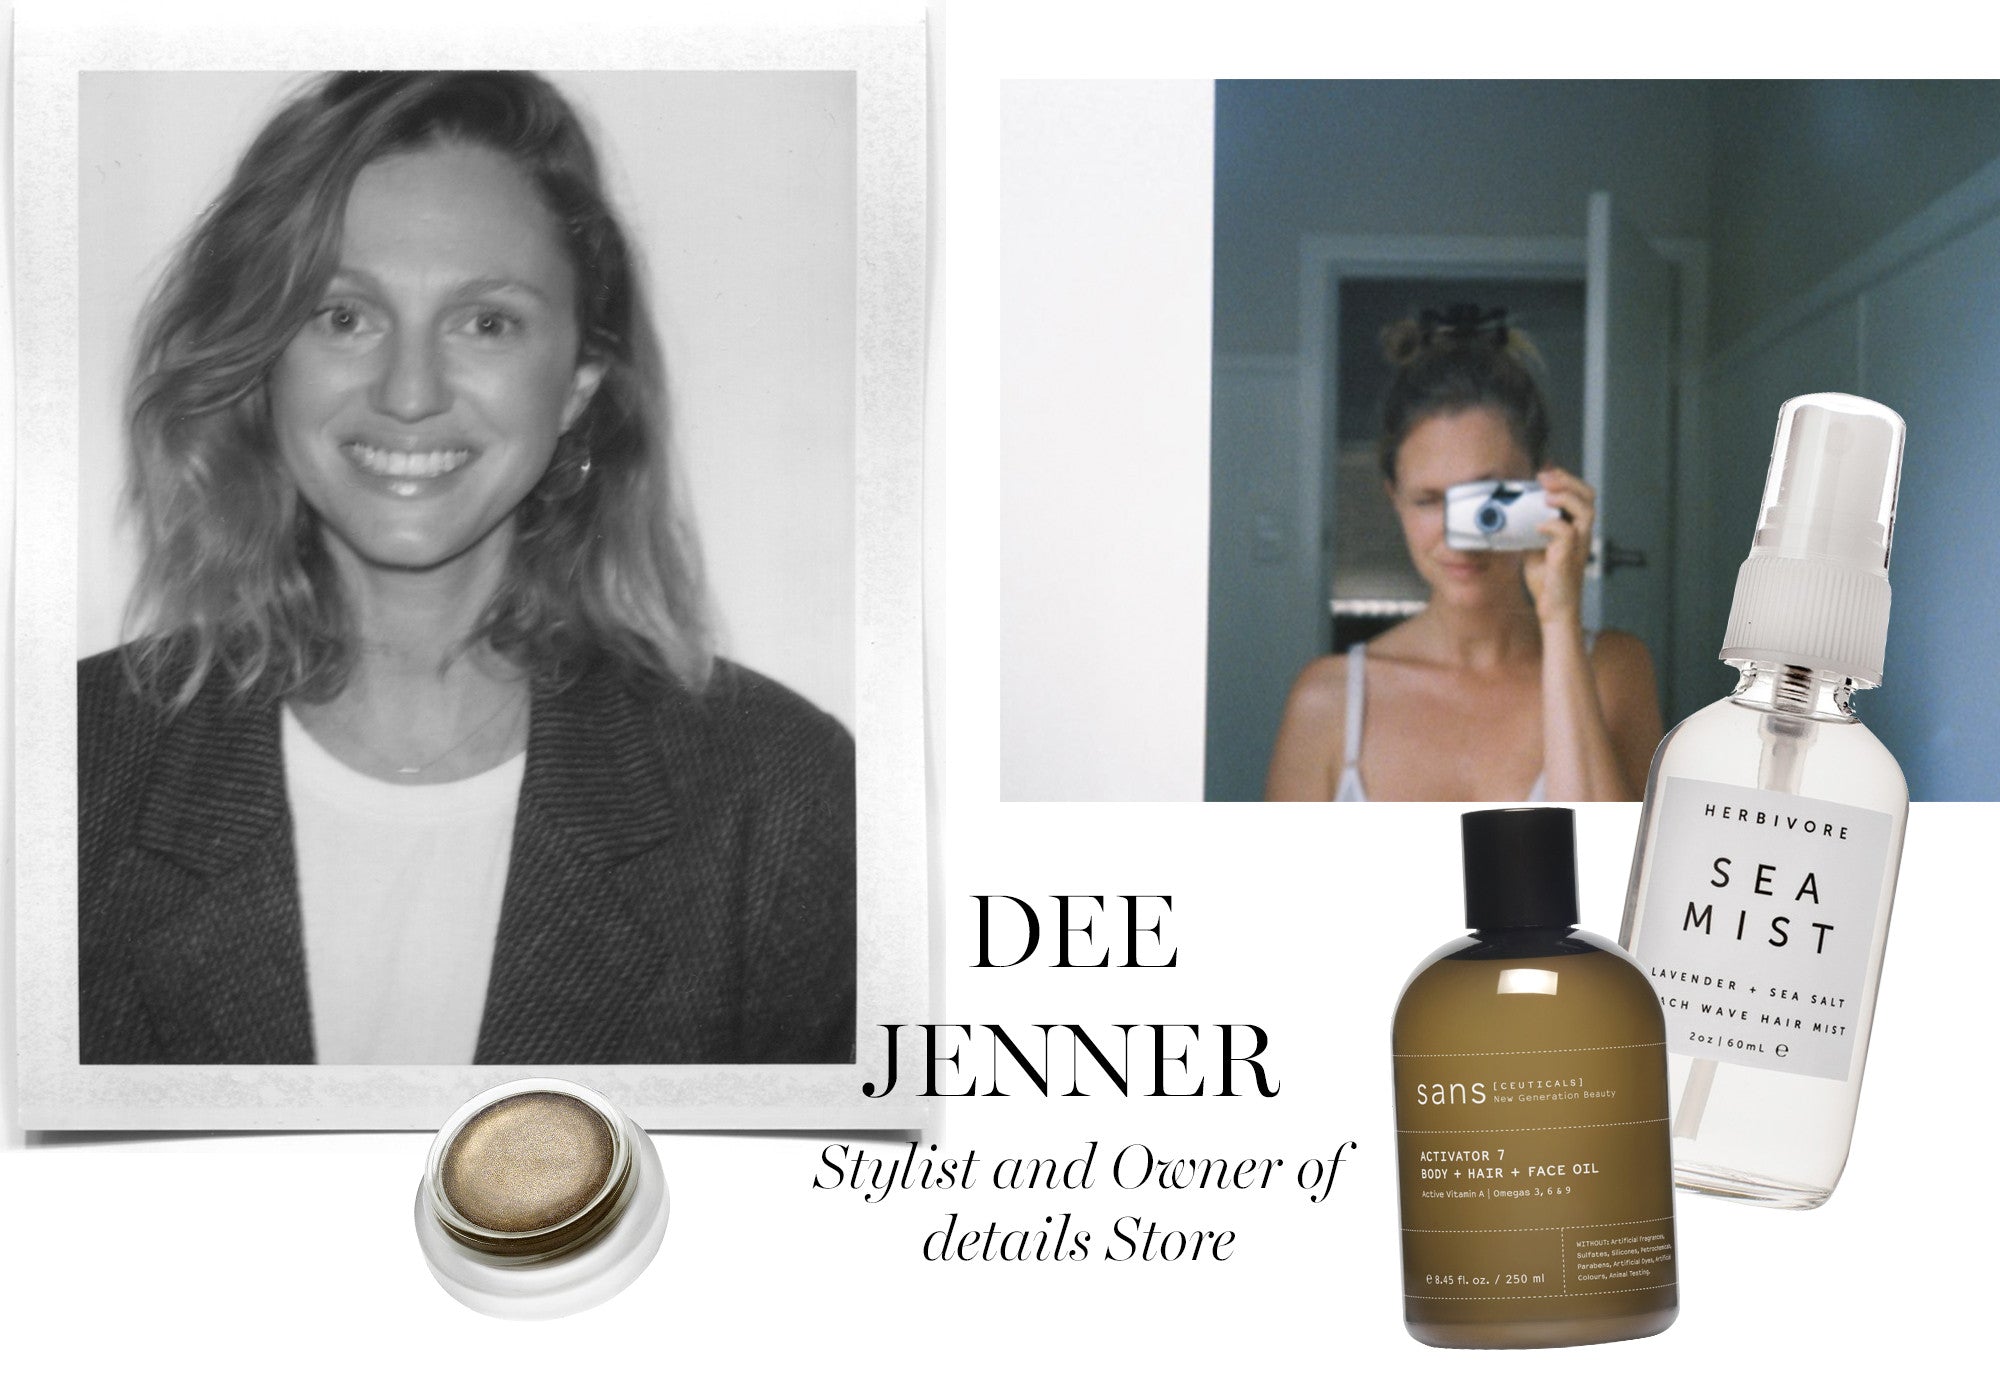 Dee Jenner Stylist and owner of details Store